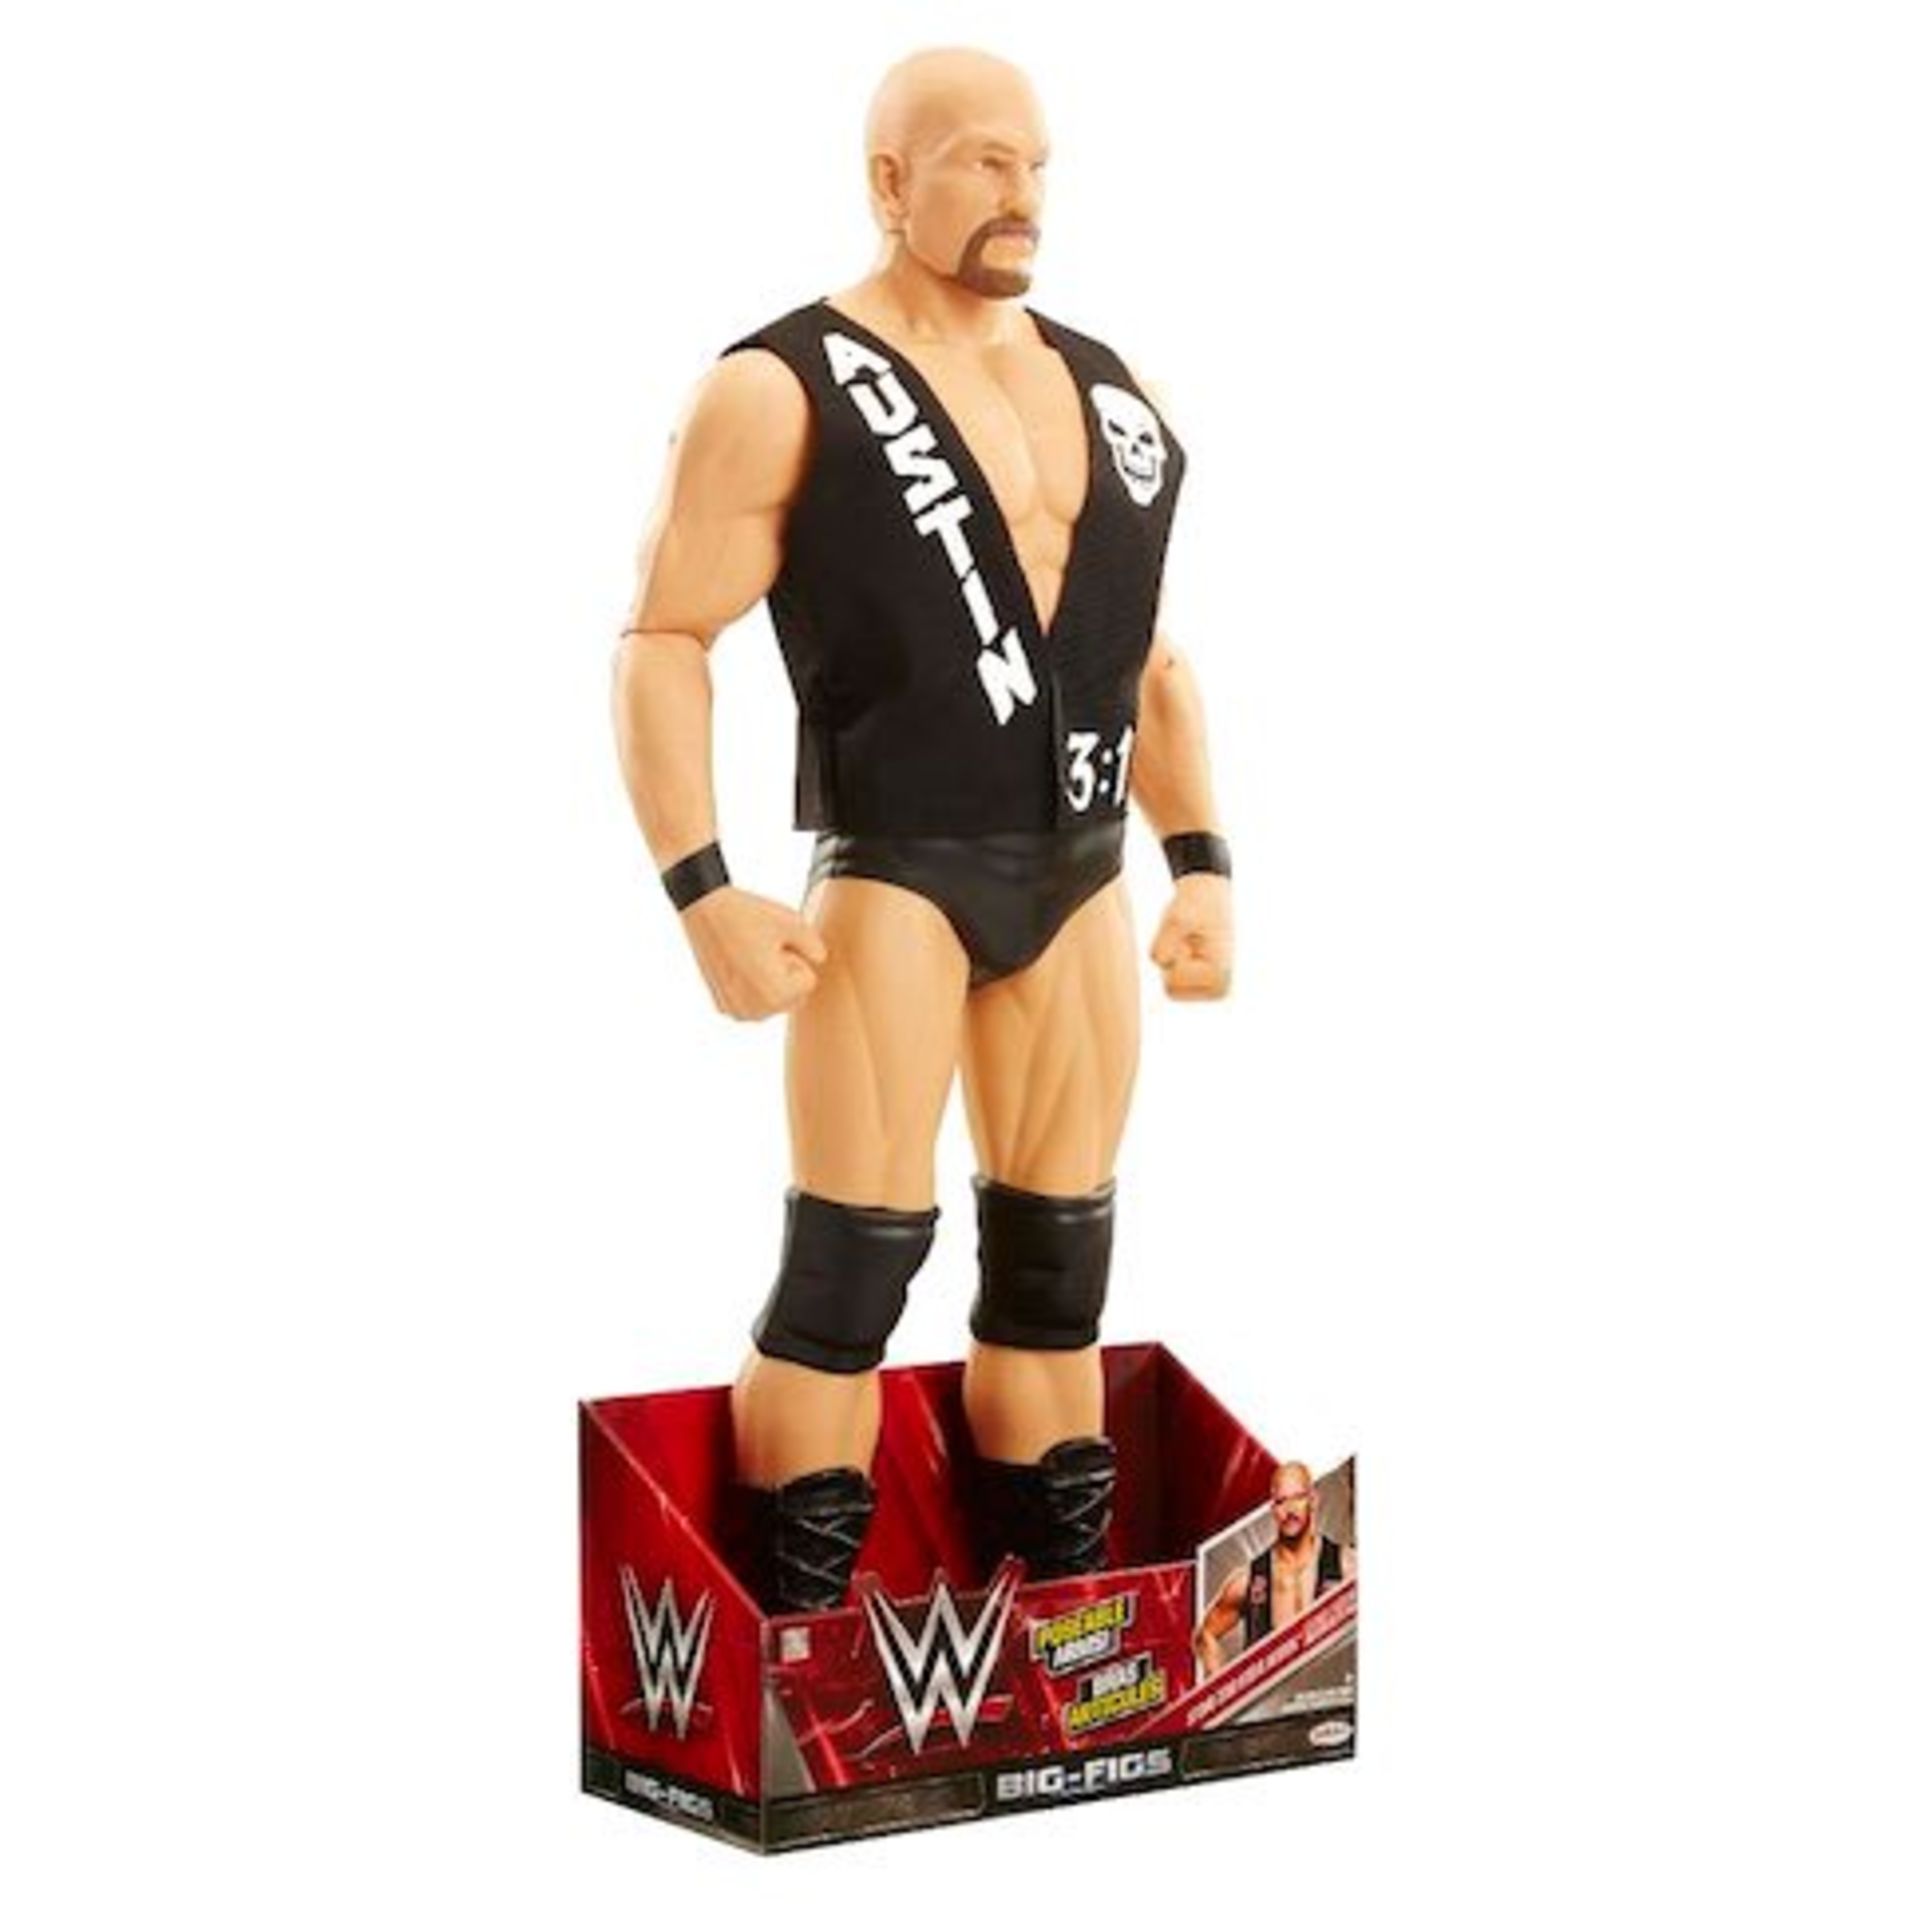 V Brand New Massive 31" WWE Stone Cold Steve Austin Action Figures - 3count.co.uk Price £28.99 - 8 - Image 2 of 4